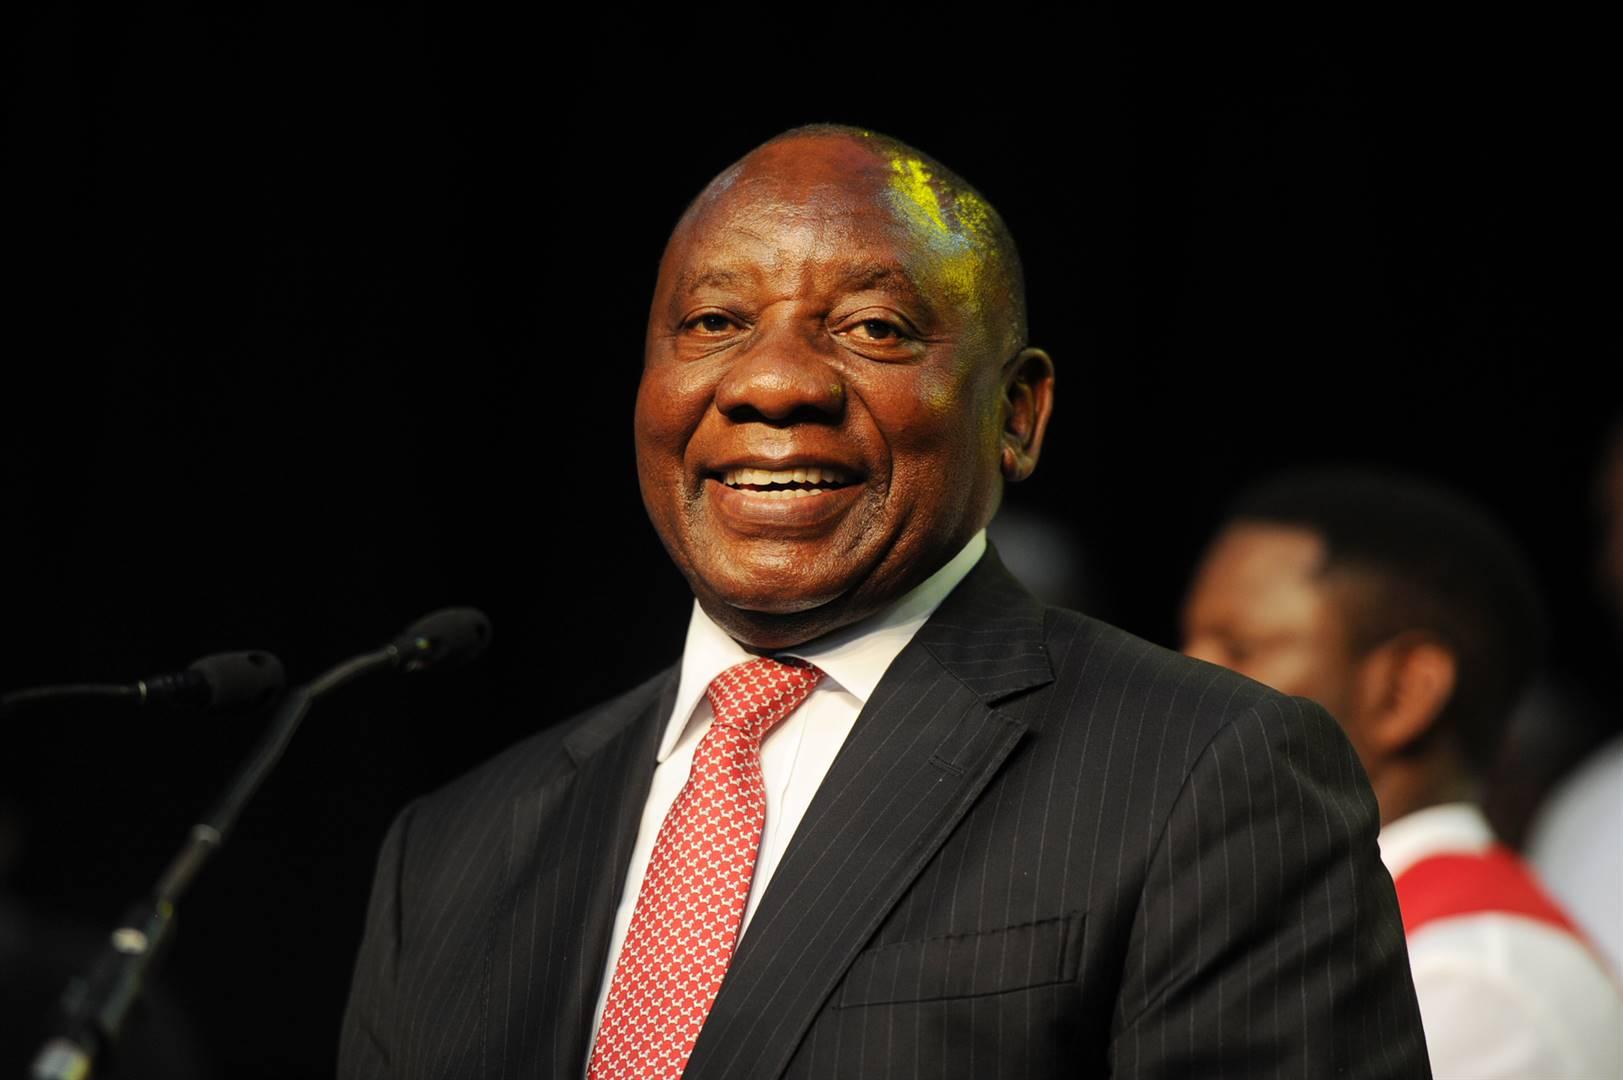 Ramaphosa did not interfere with State Capture Inquiry's work - Zondo